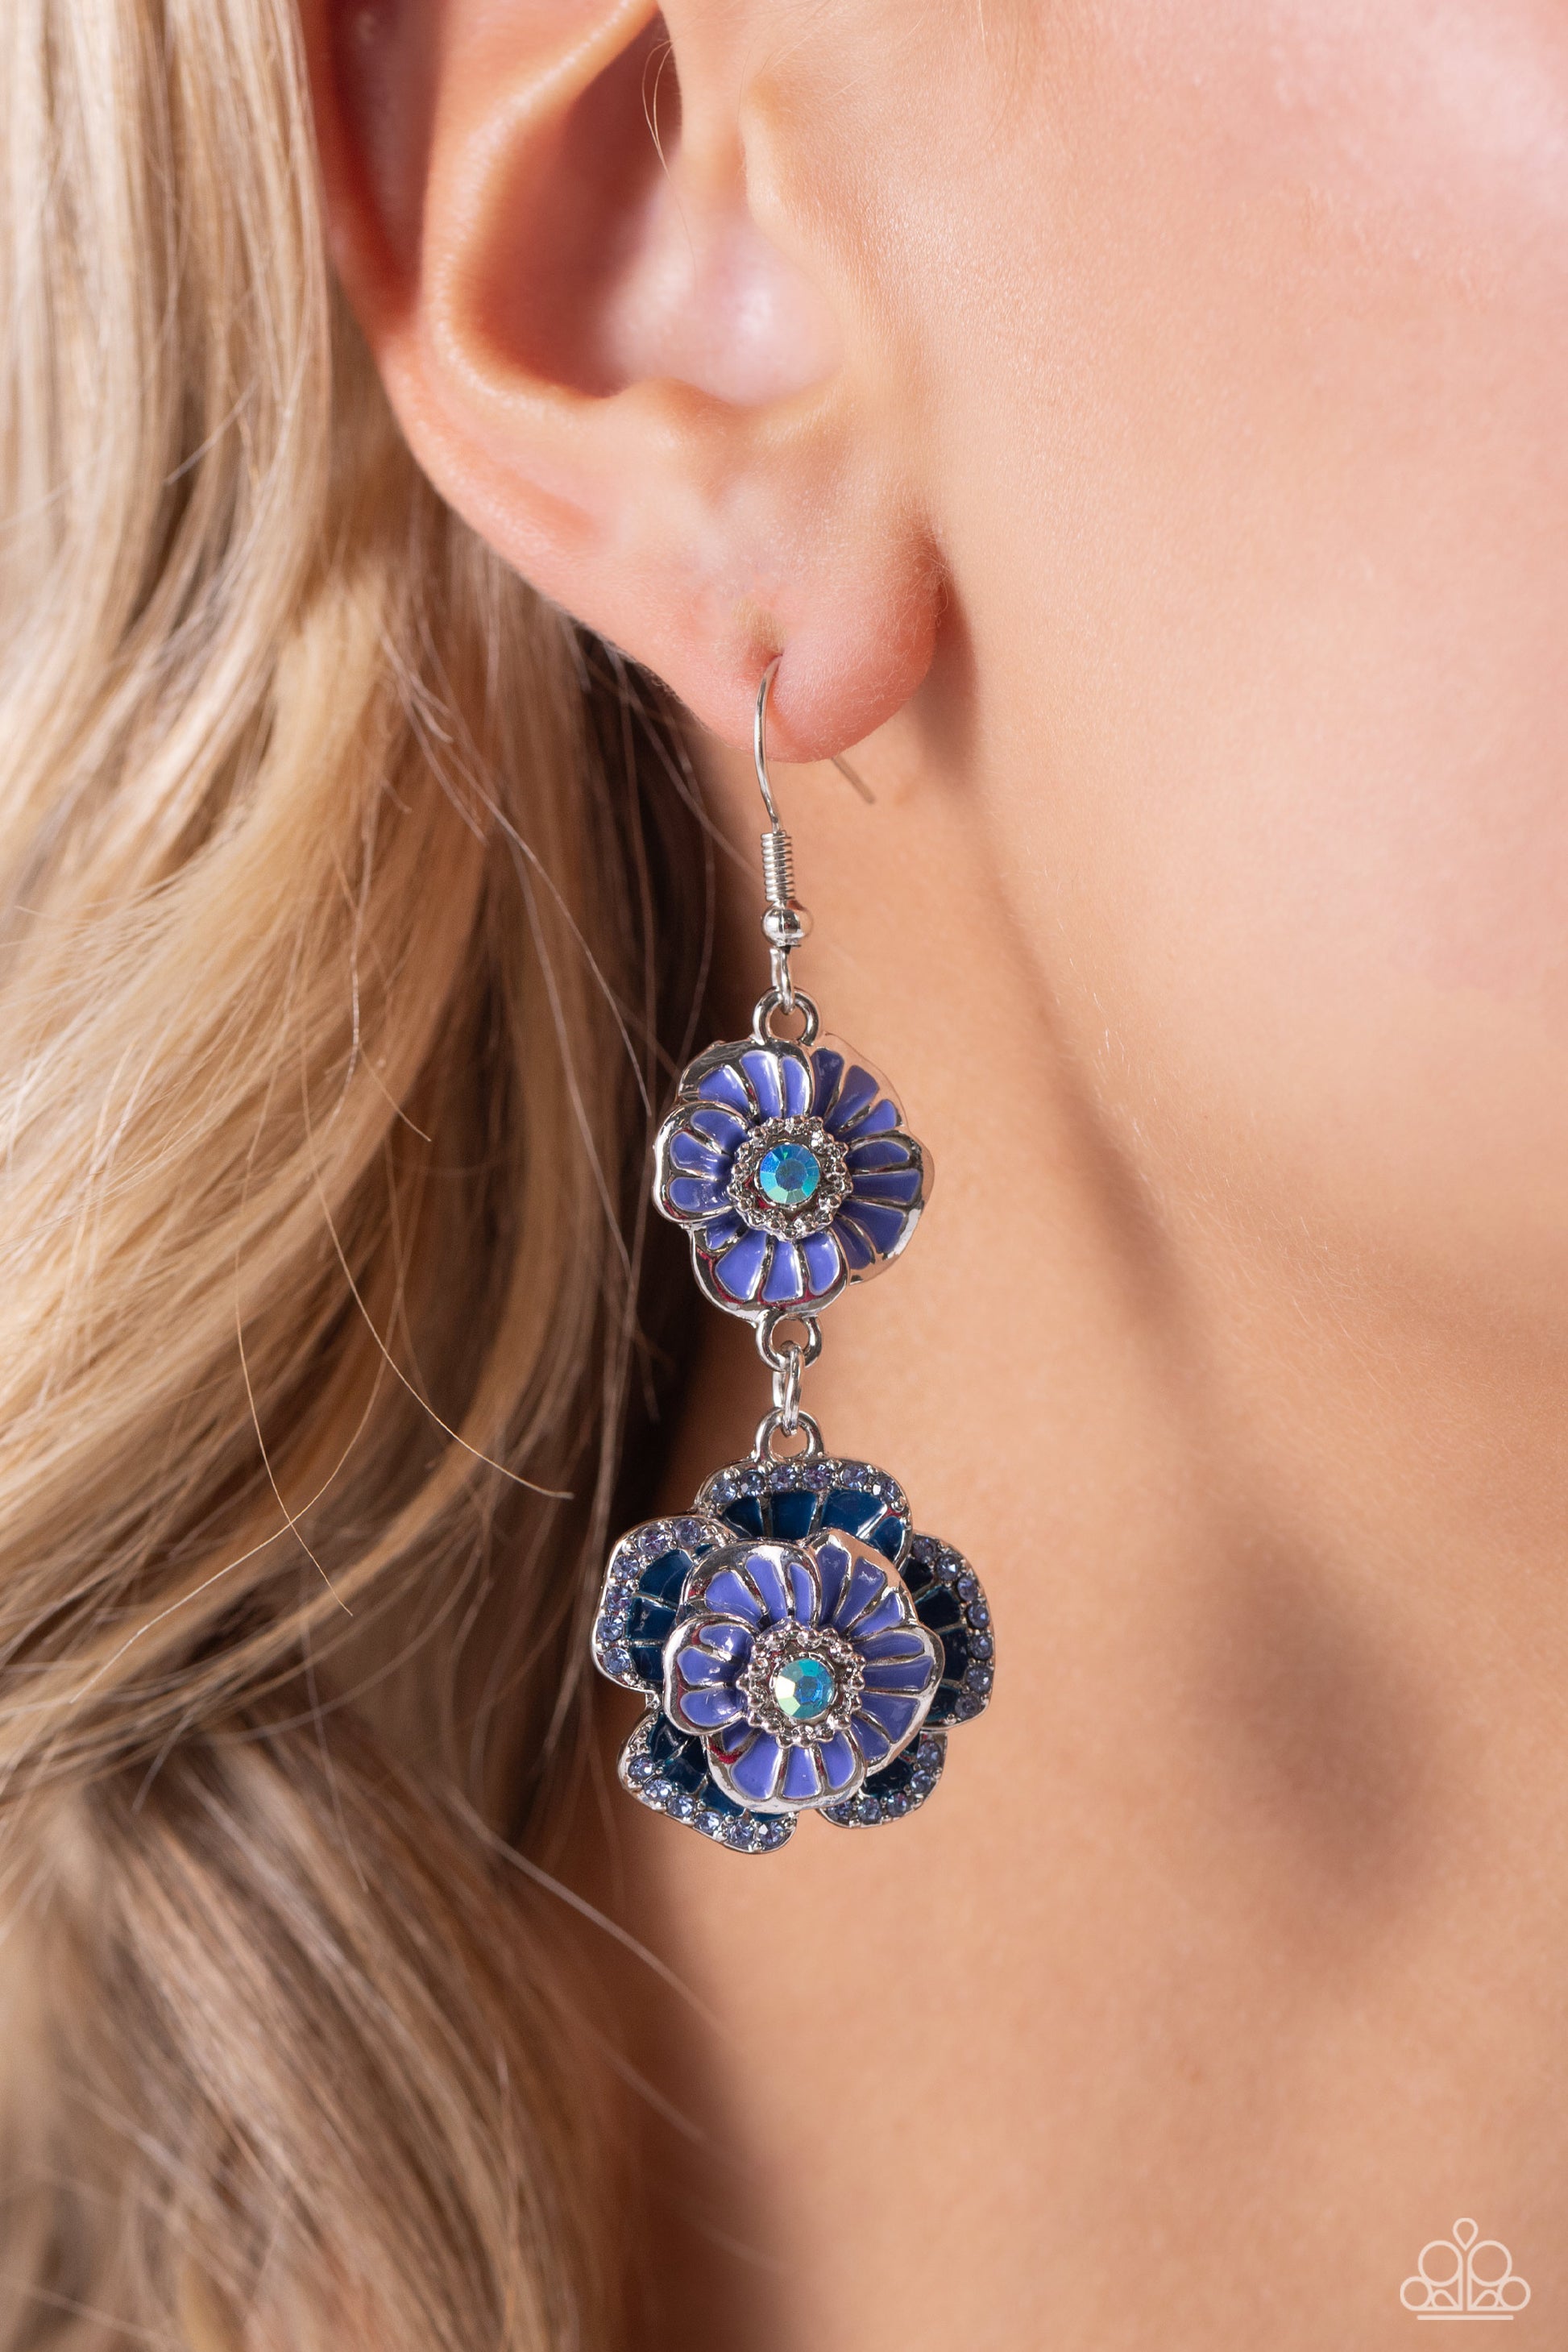 Intricate Impression Blue Flower Earring - Paparazzi Accessories  Dotted with dainty blue iridescent gem centers and navy rhinestone details, intricate 3D silver flowers, adorned in Persian Jewel shades, link into a whimsical, glitzy lure. Earring attaches to a standard fishhook fitting. Due to its prismatic palette, color may vary.  Sold as one pair of earrings.  Sku:  P5WH-BLXX-268XX